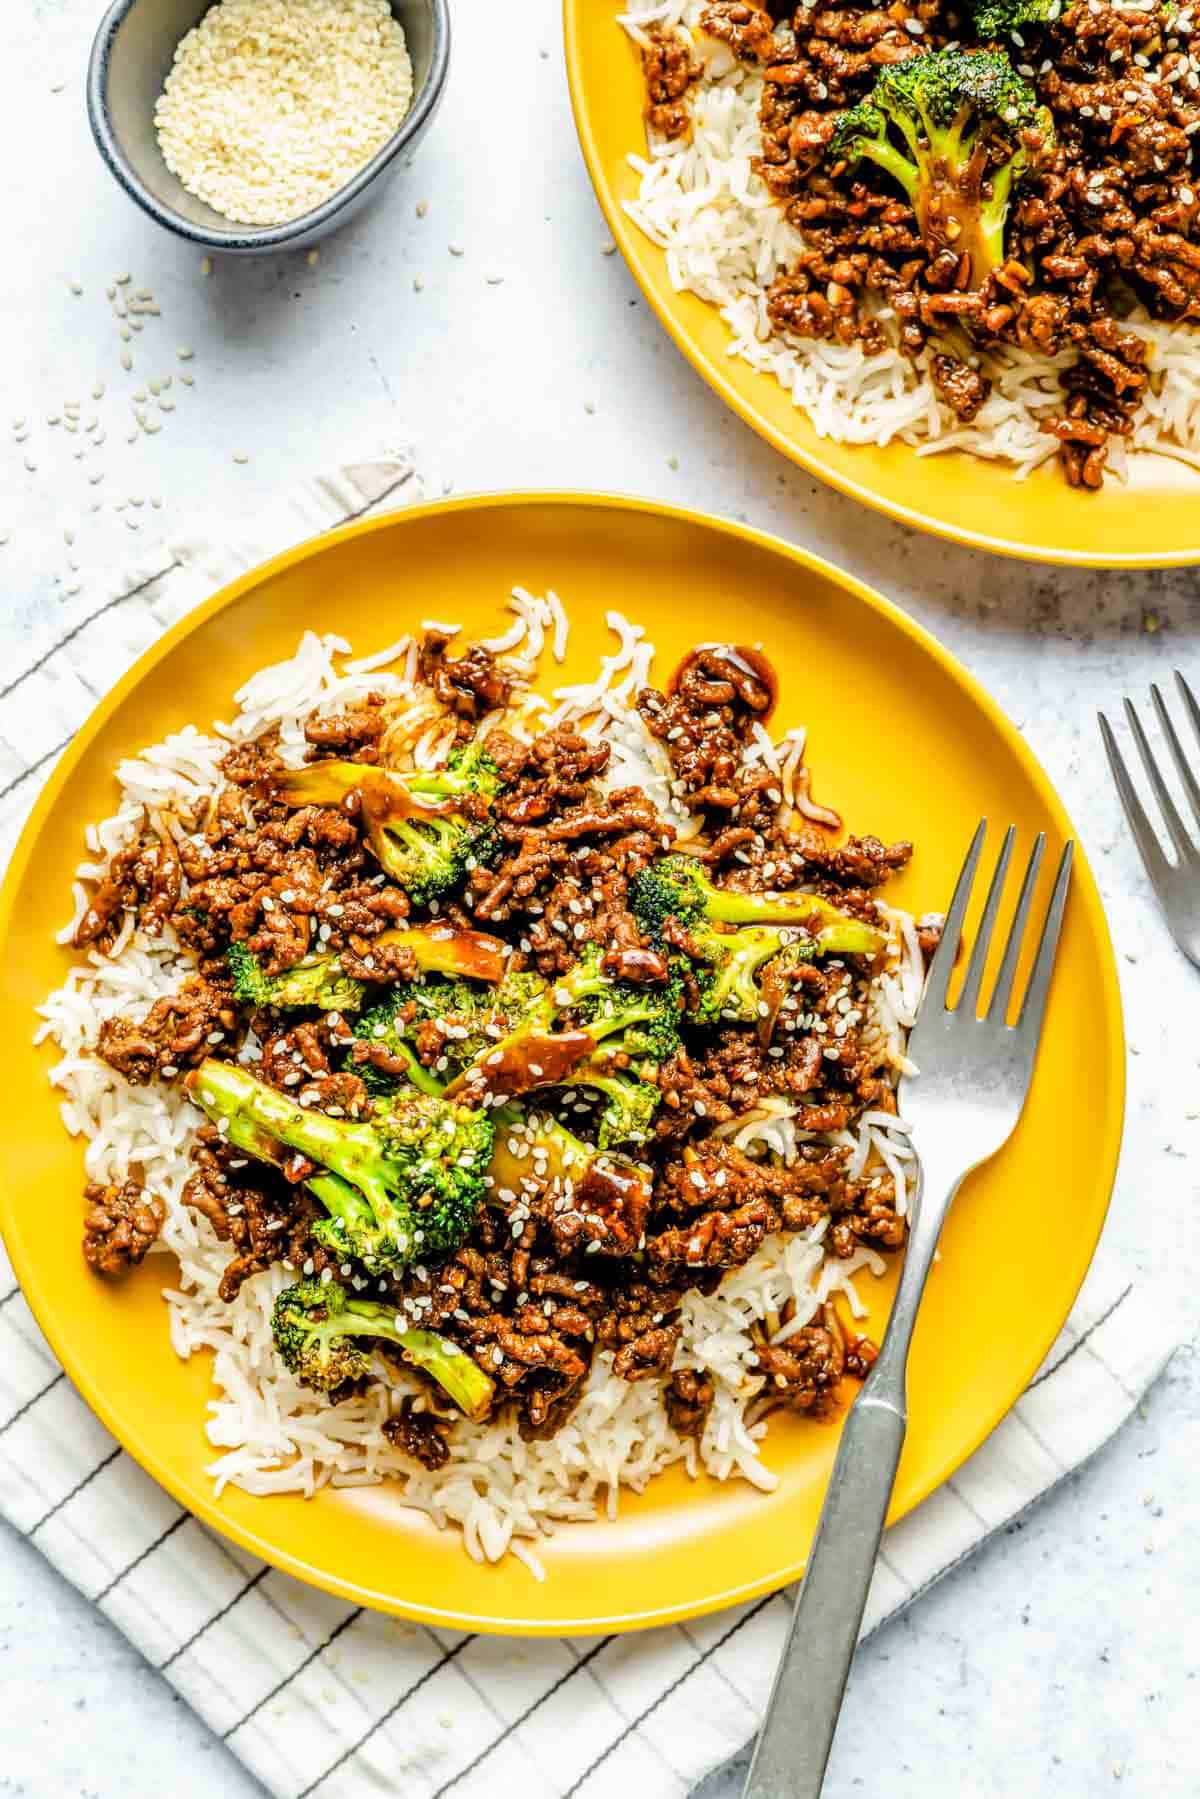 ground beef and broccoli plated on bright yellow plates on a bed of jasmine rice with a metal fork on the plate